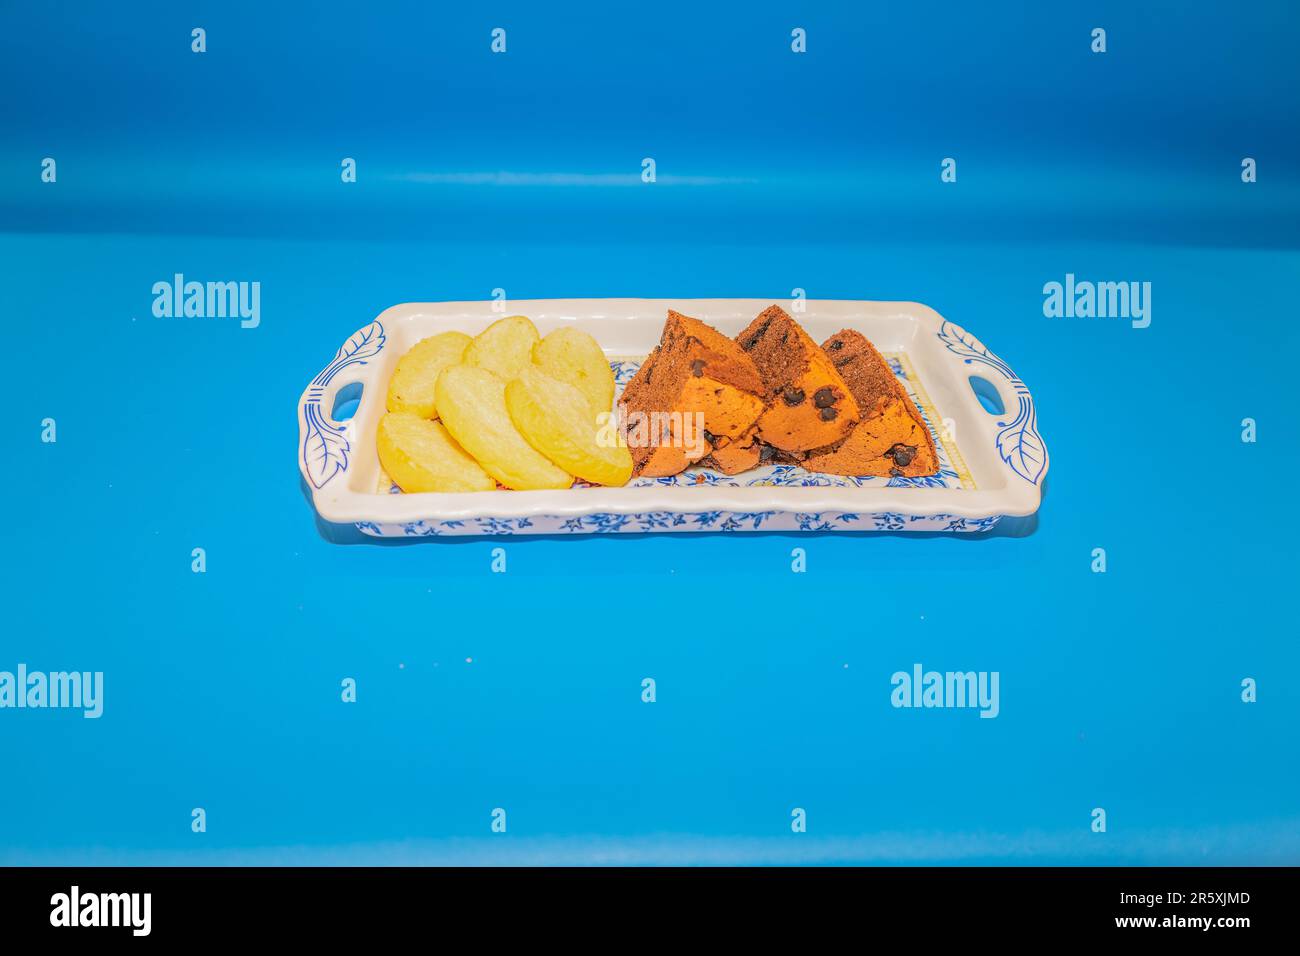 https://c8.alamy.com/comp/2R5XJMD/the-blue-flower-pattern-ceramic-rectangular-cake-container-is-a-stunning-piece-for-storing-and-displaying-your-delicious-baked-creations-2R5XJMD.jpg